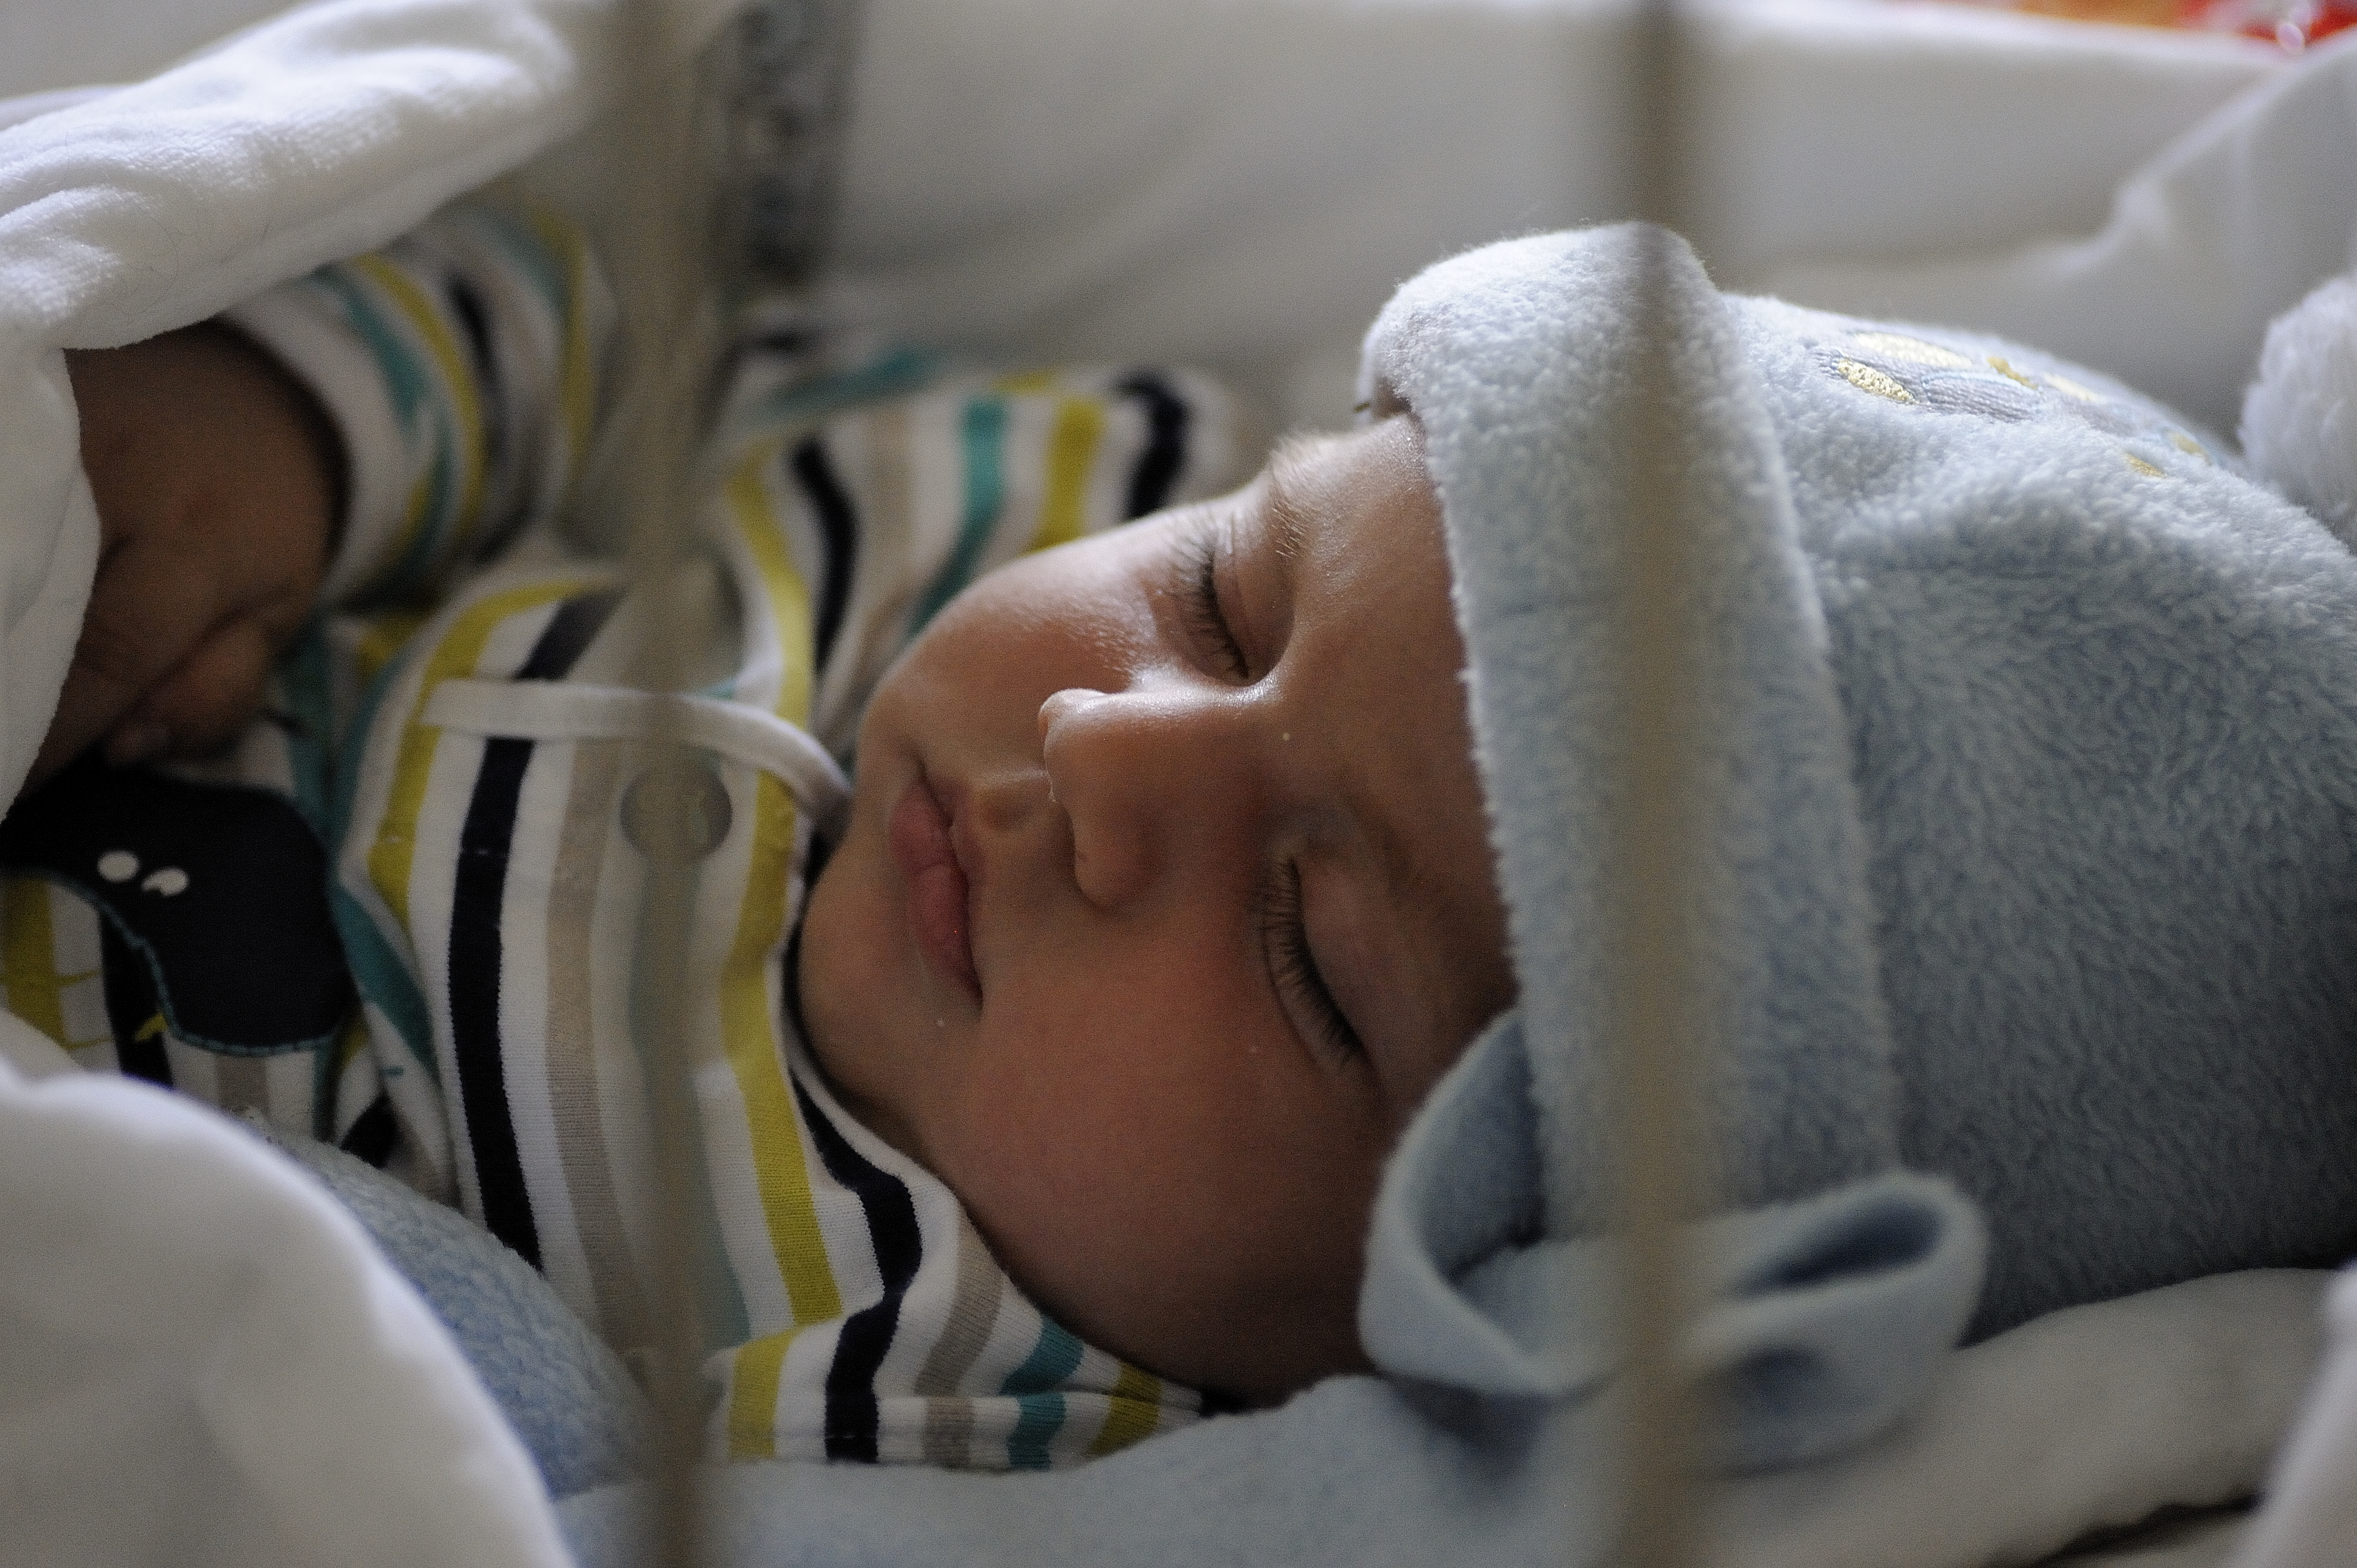 A baby sleeps under a blanket at the reception centre for refugees and migrants, in the town of Šid, on the border with Croatia. The reception centre provides access to support services and offers refugee and migrant children and families the opportunity to rest during their arduous journey.